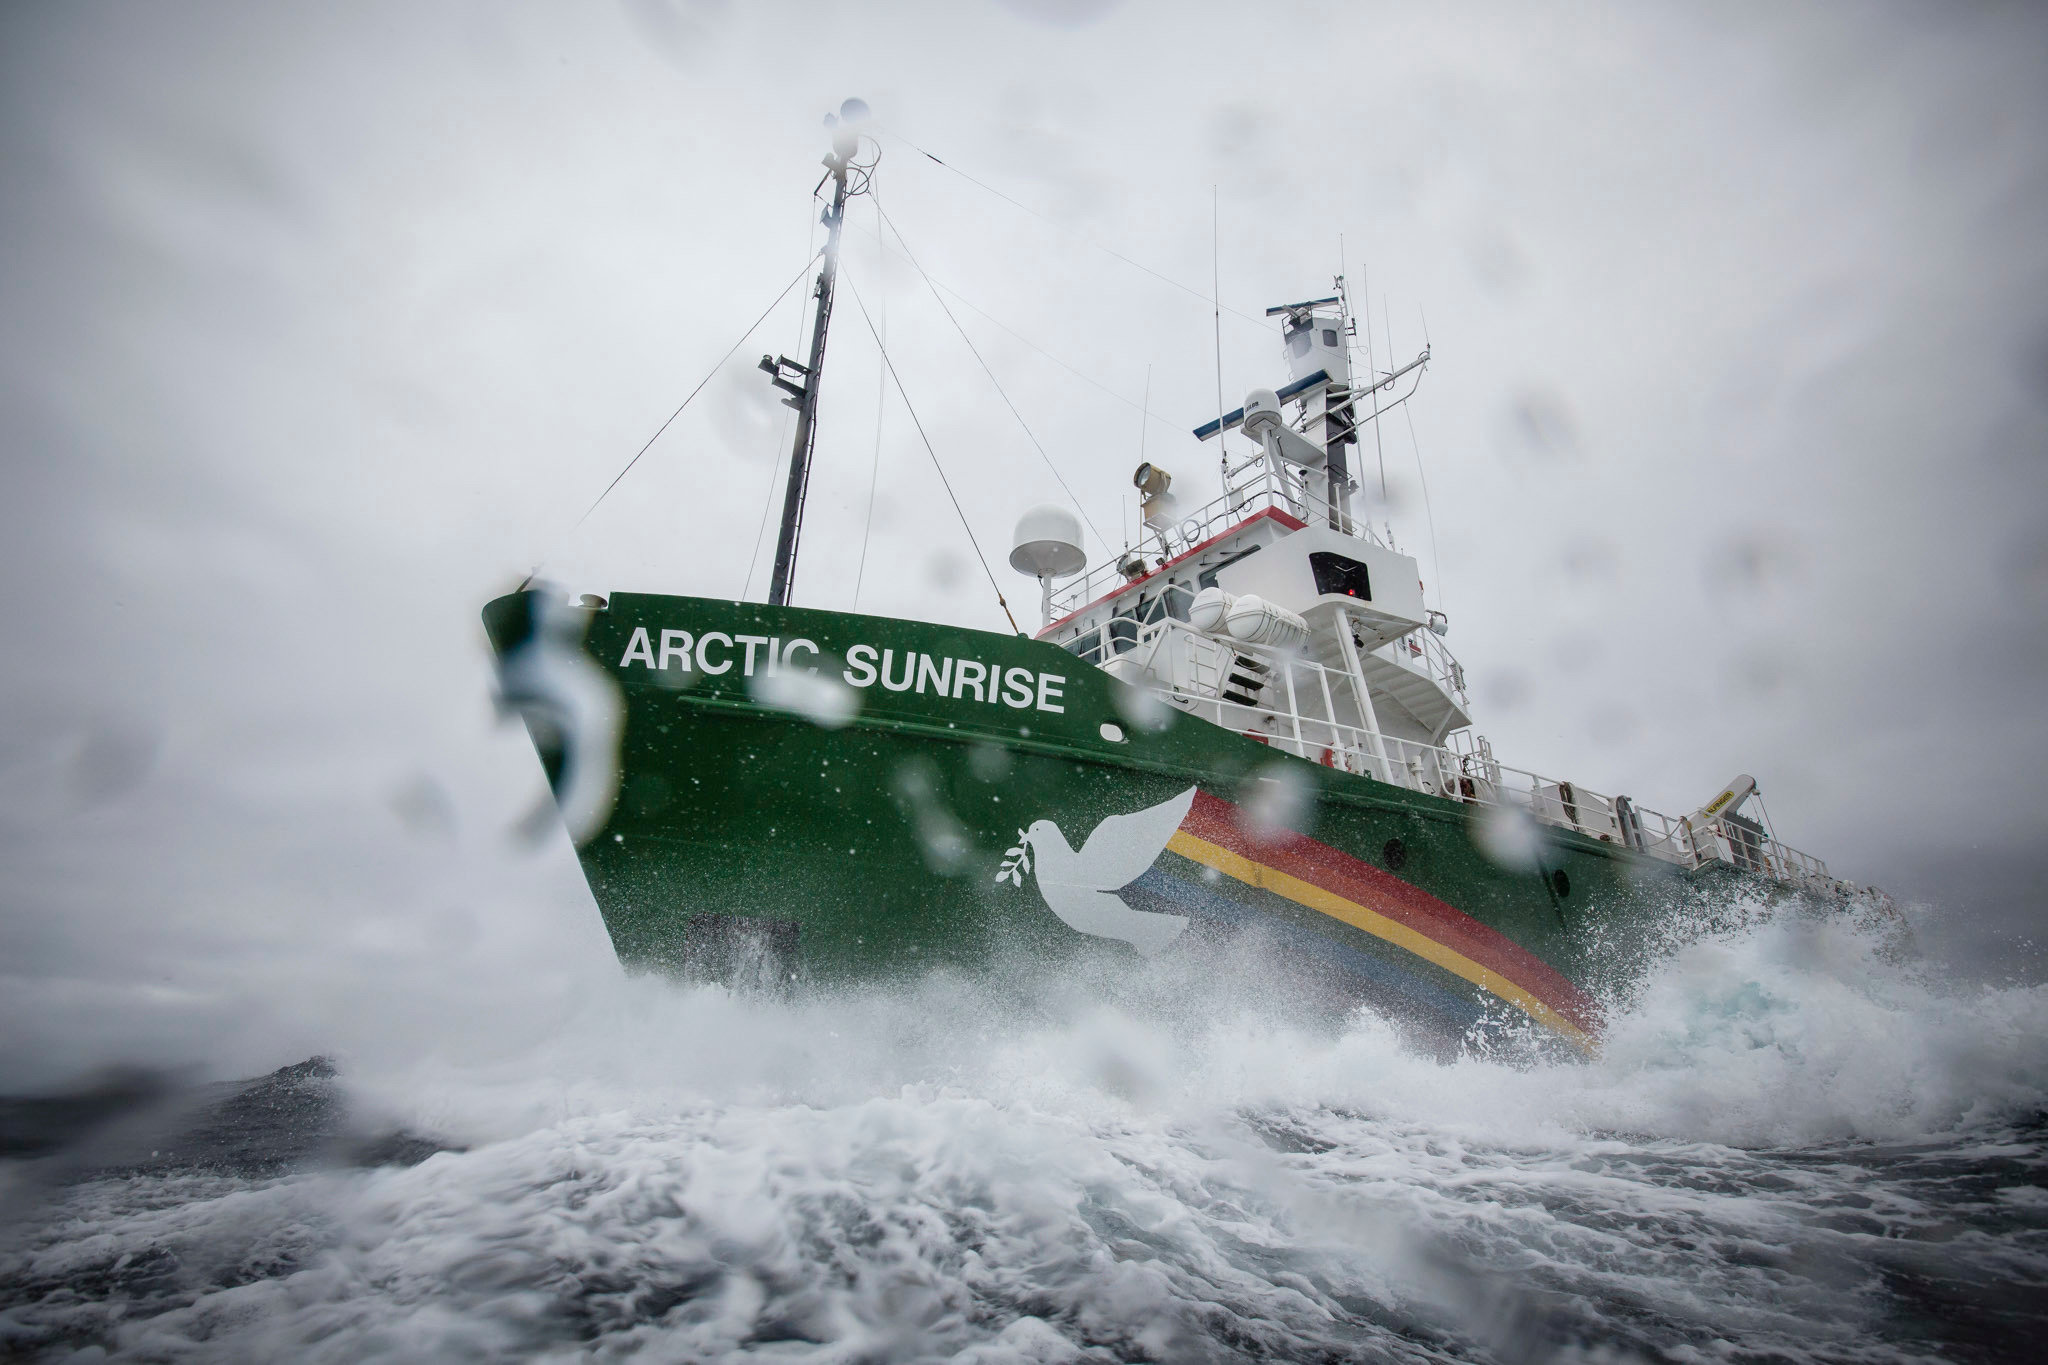 Greenpeace's Arctic Sunrise ship sails during a protest in the Barents sea, Norway, July 21, 2017. (Will Rose / Greenpeace / Handout via Reuters )